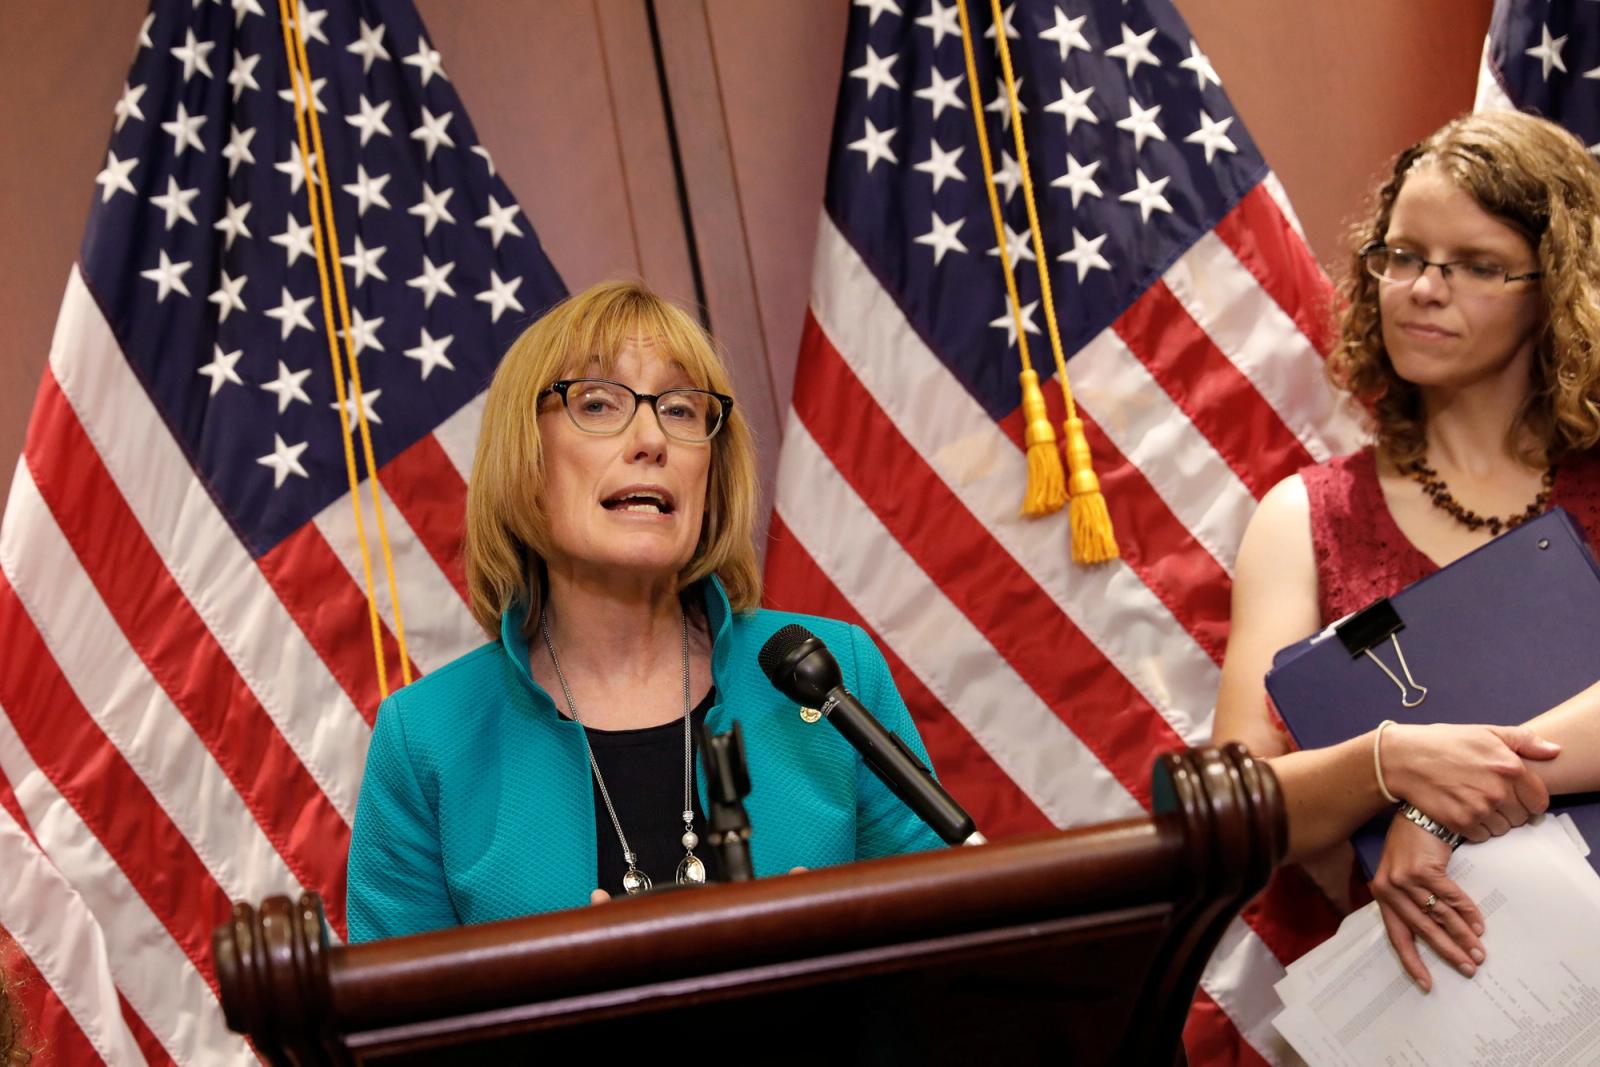 Sen. Maggie Hassan (D-NH), accompanied by children with preexisting conditions covered under the Affordable Care Act, speaks at a press conference about the Senate health care bill on Capitol Hill in Washington, U.S